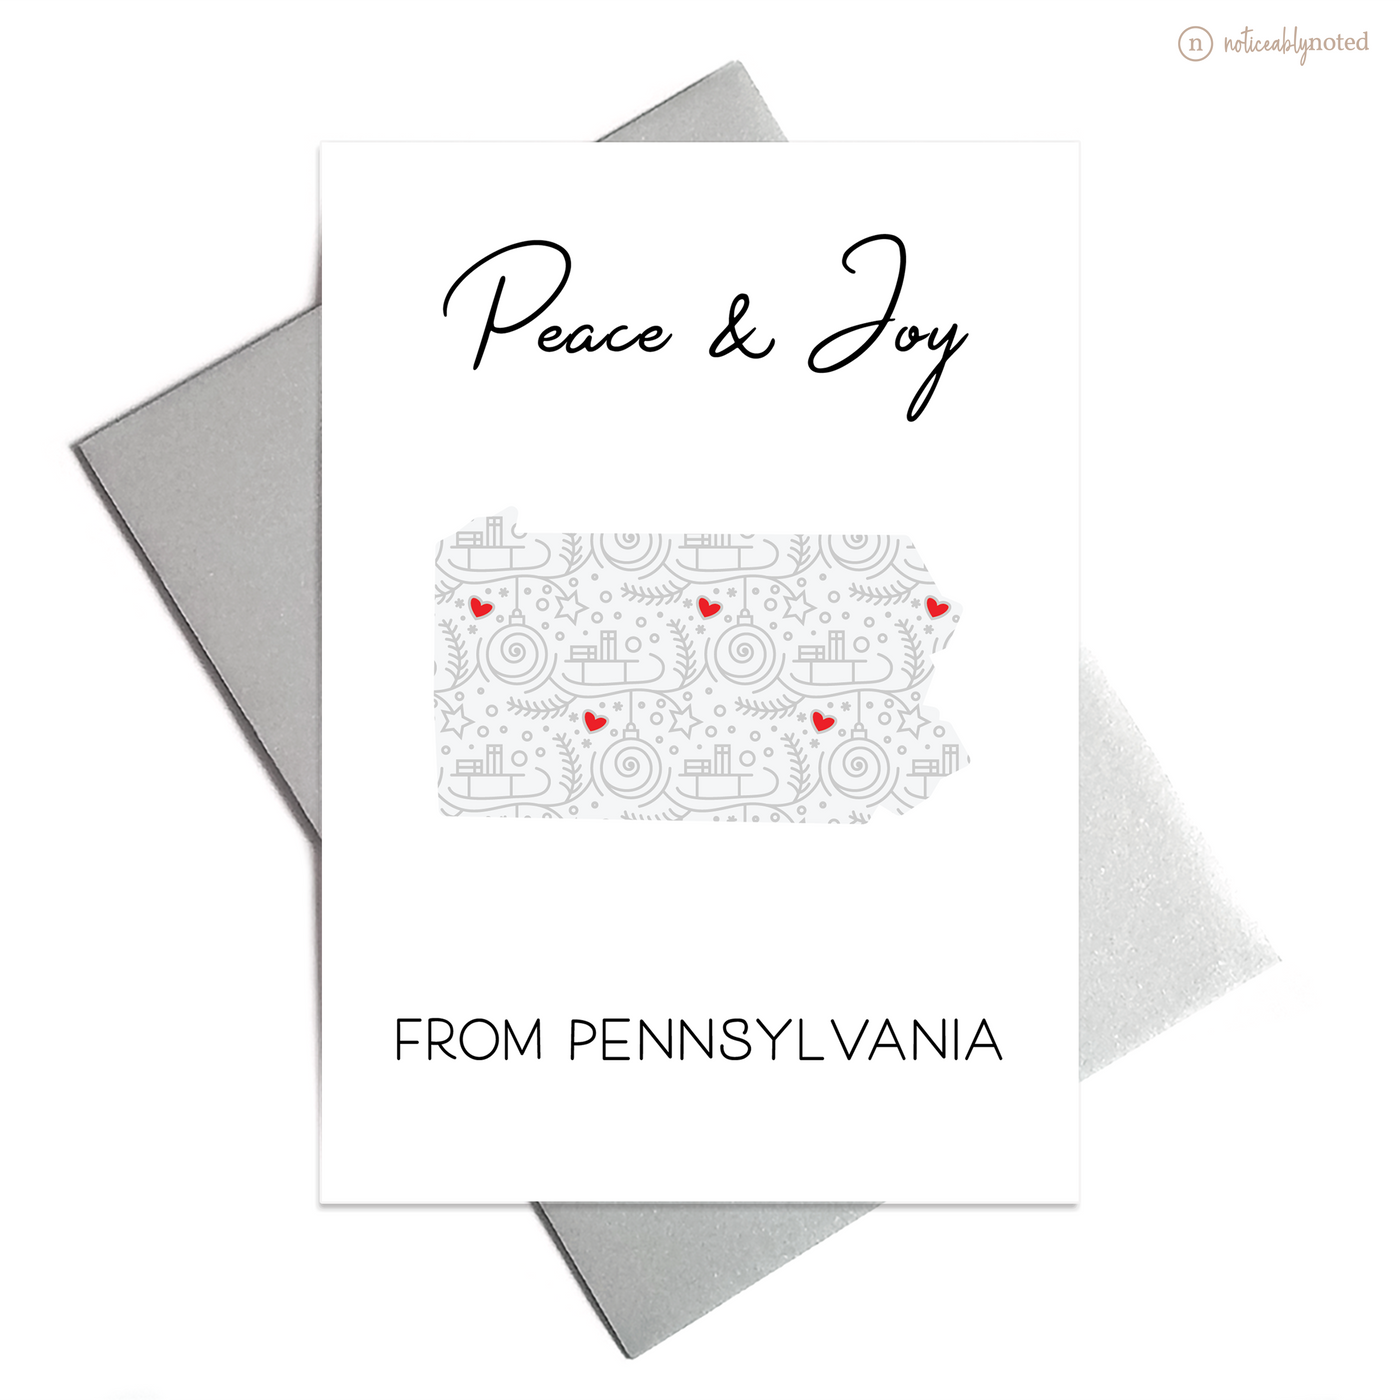 PA Christmas Card | Noticeably Noted